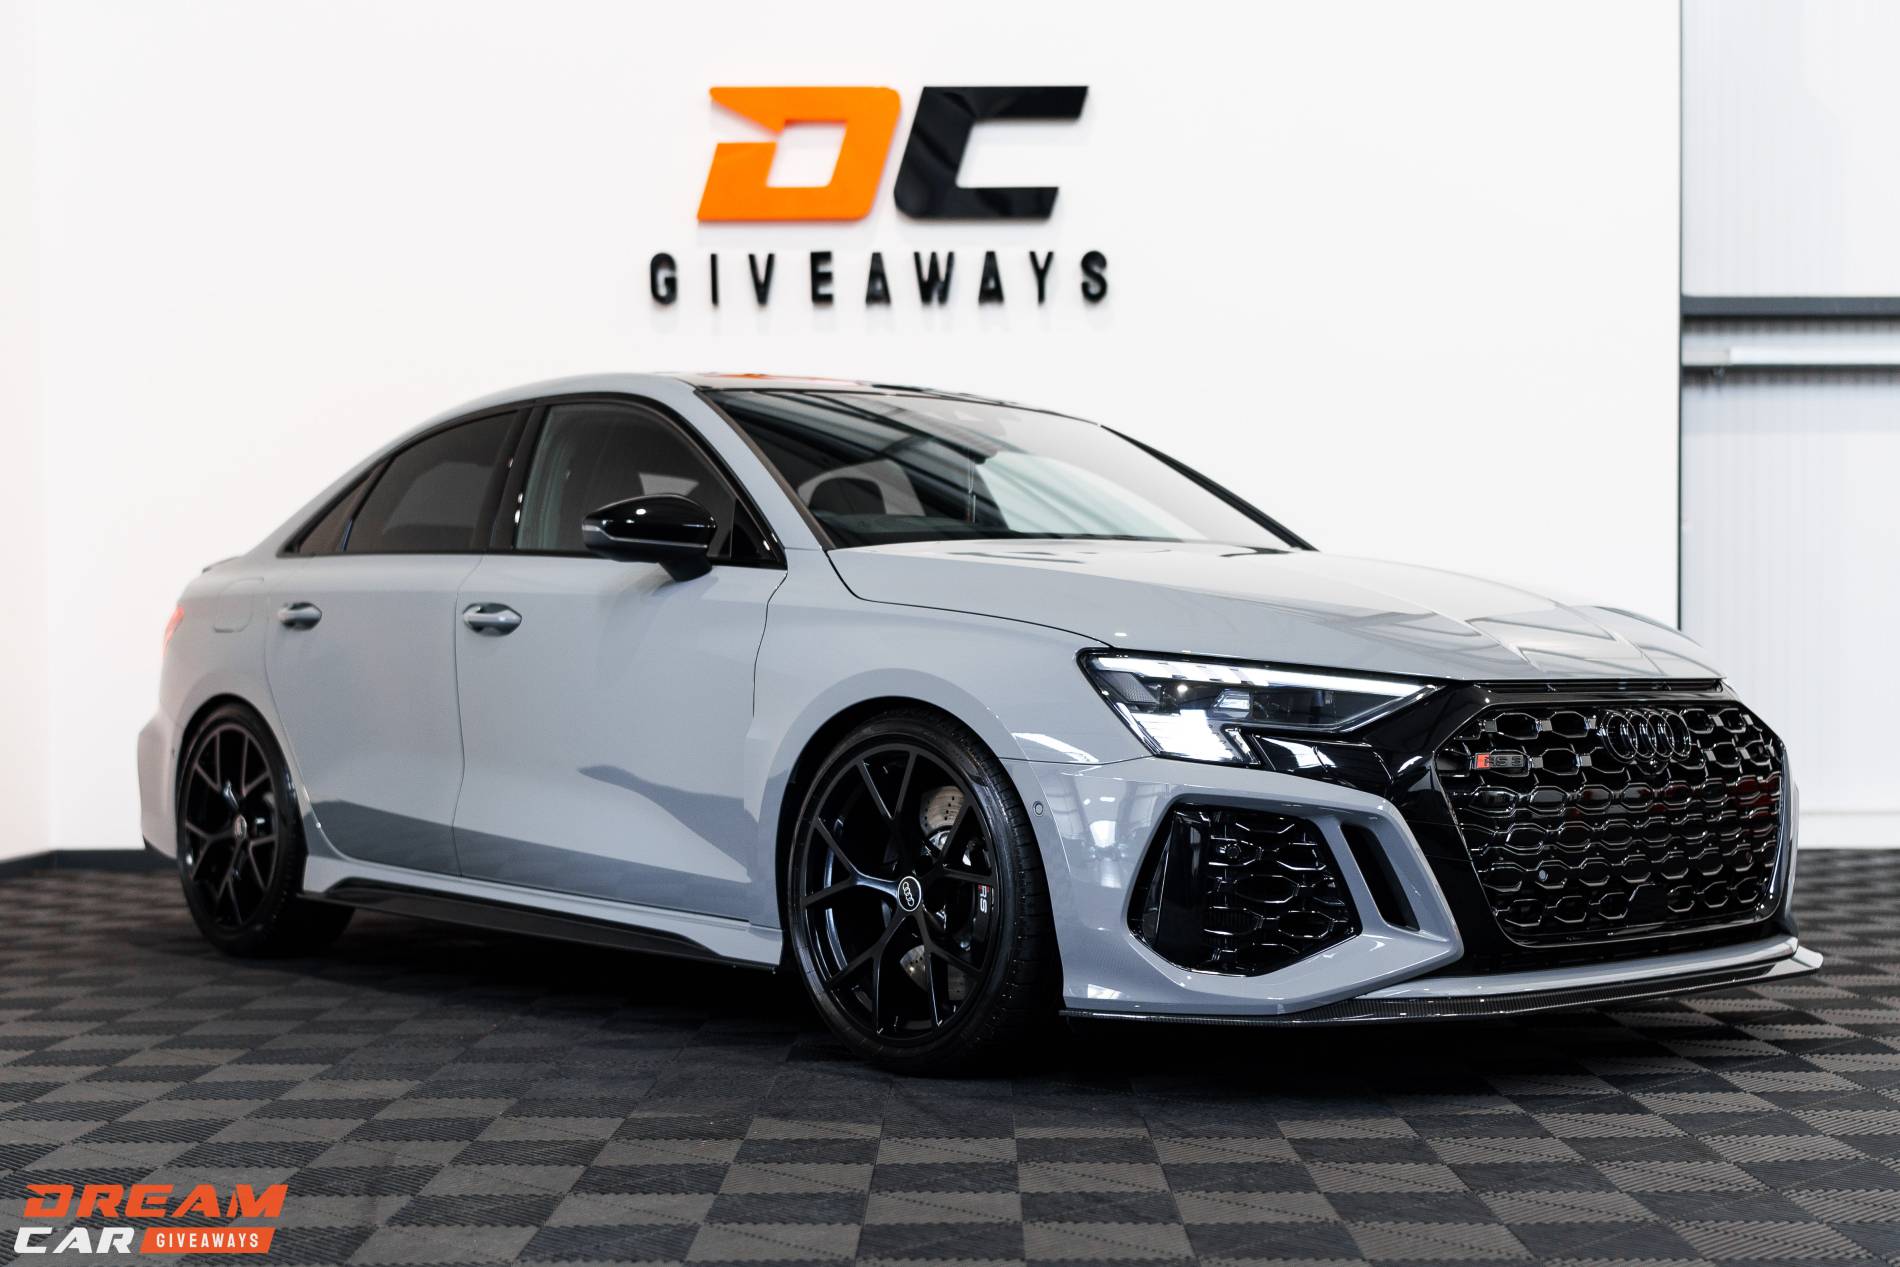 Win this 2023 Audi RS3 Vorsprung & £2,000 or £52,000 Tax Free